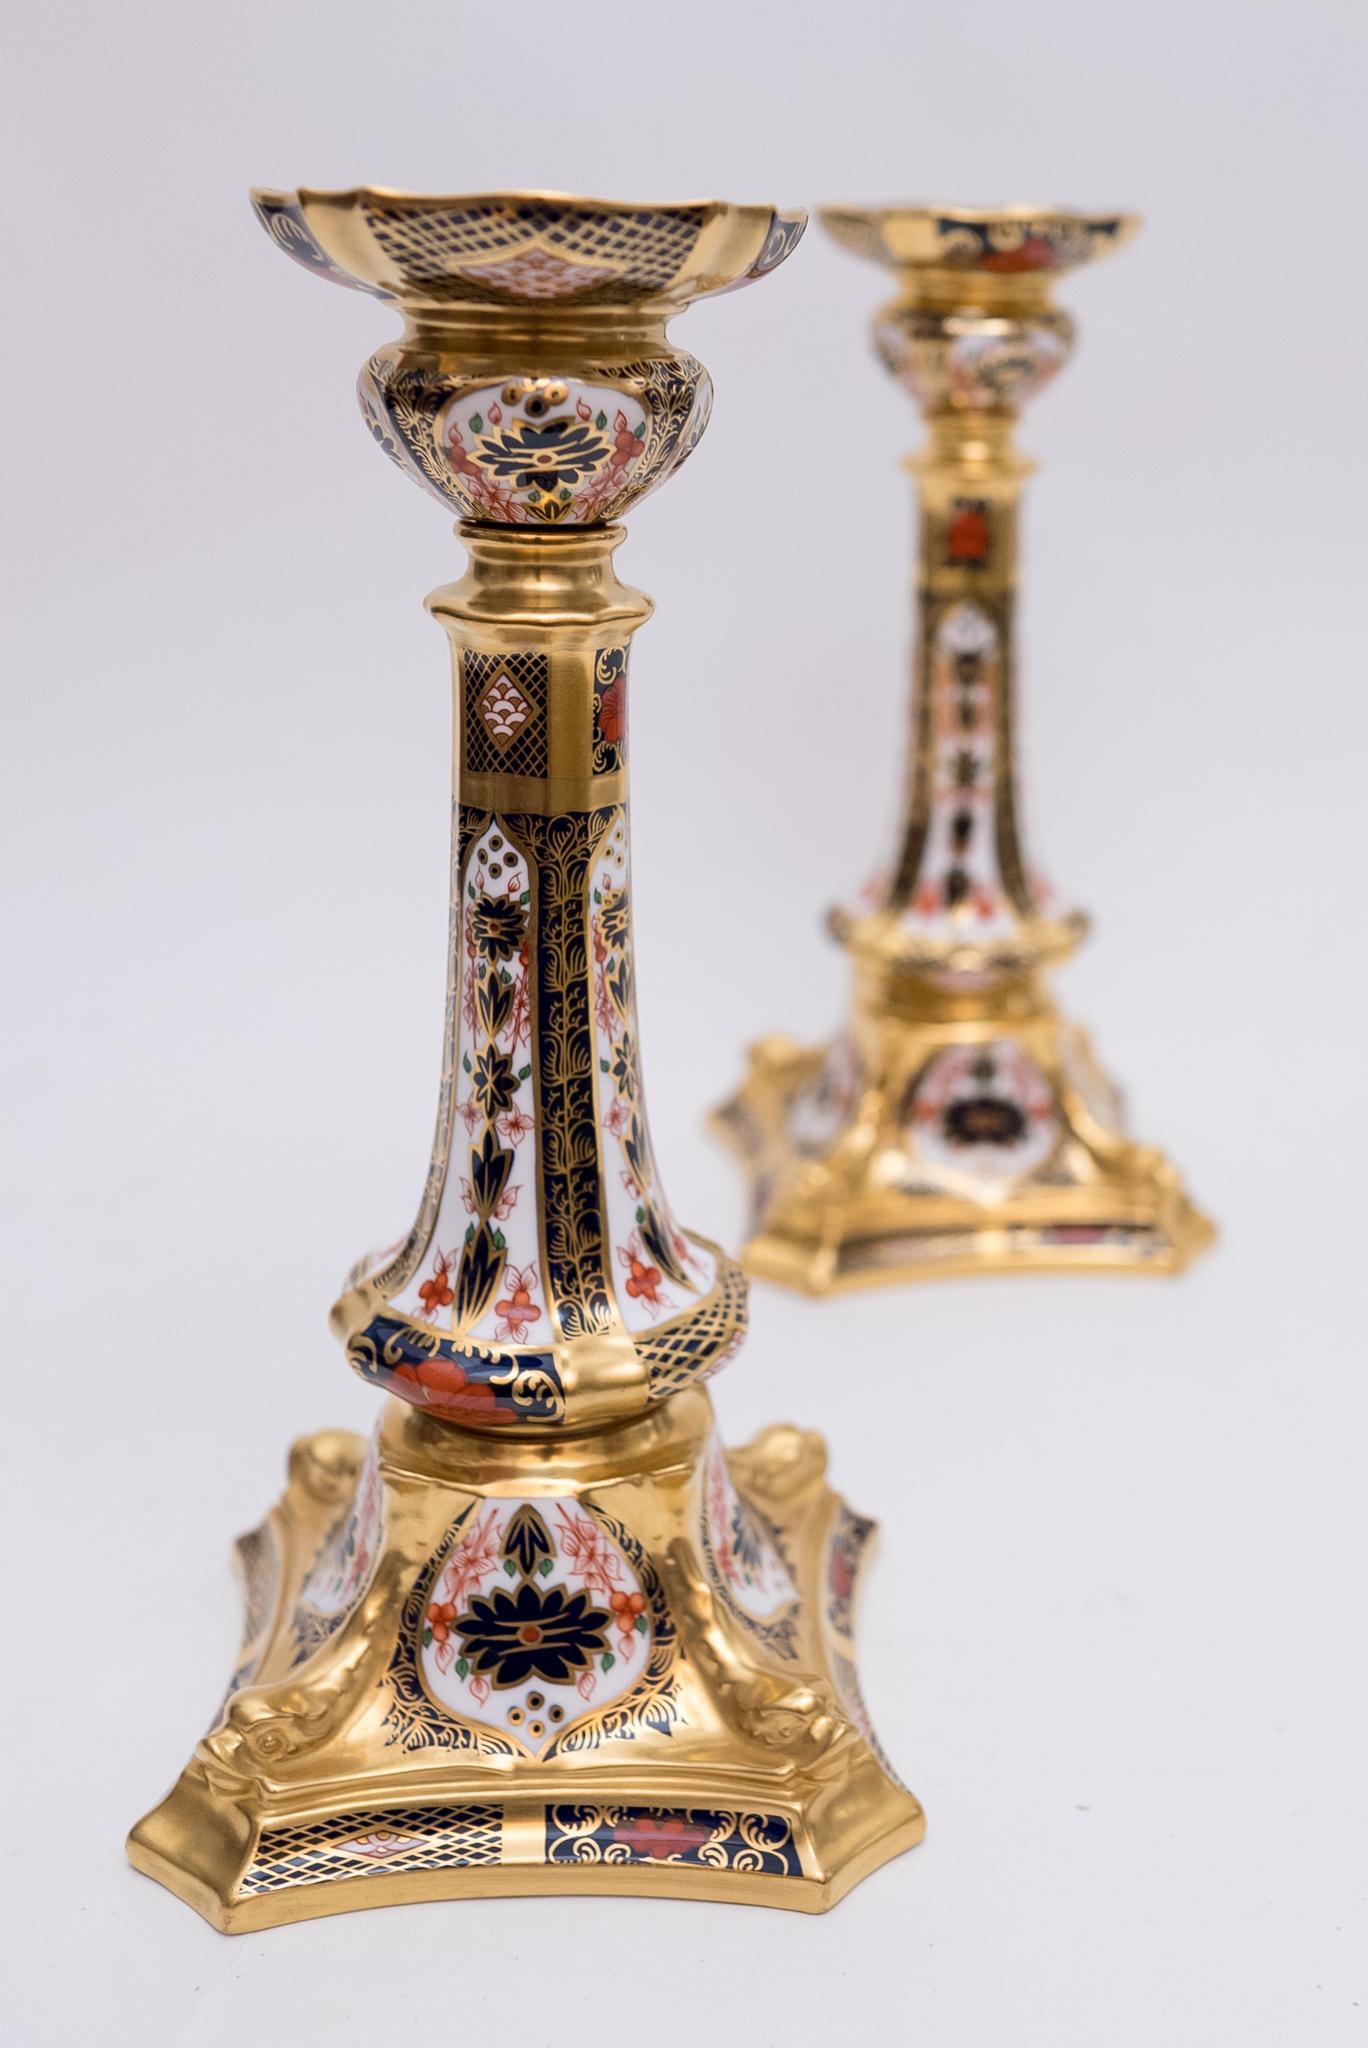 A classic pattern by one of England's re known factories, Royal Crown Derby. This is their 